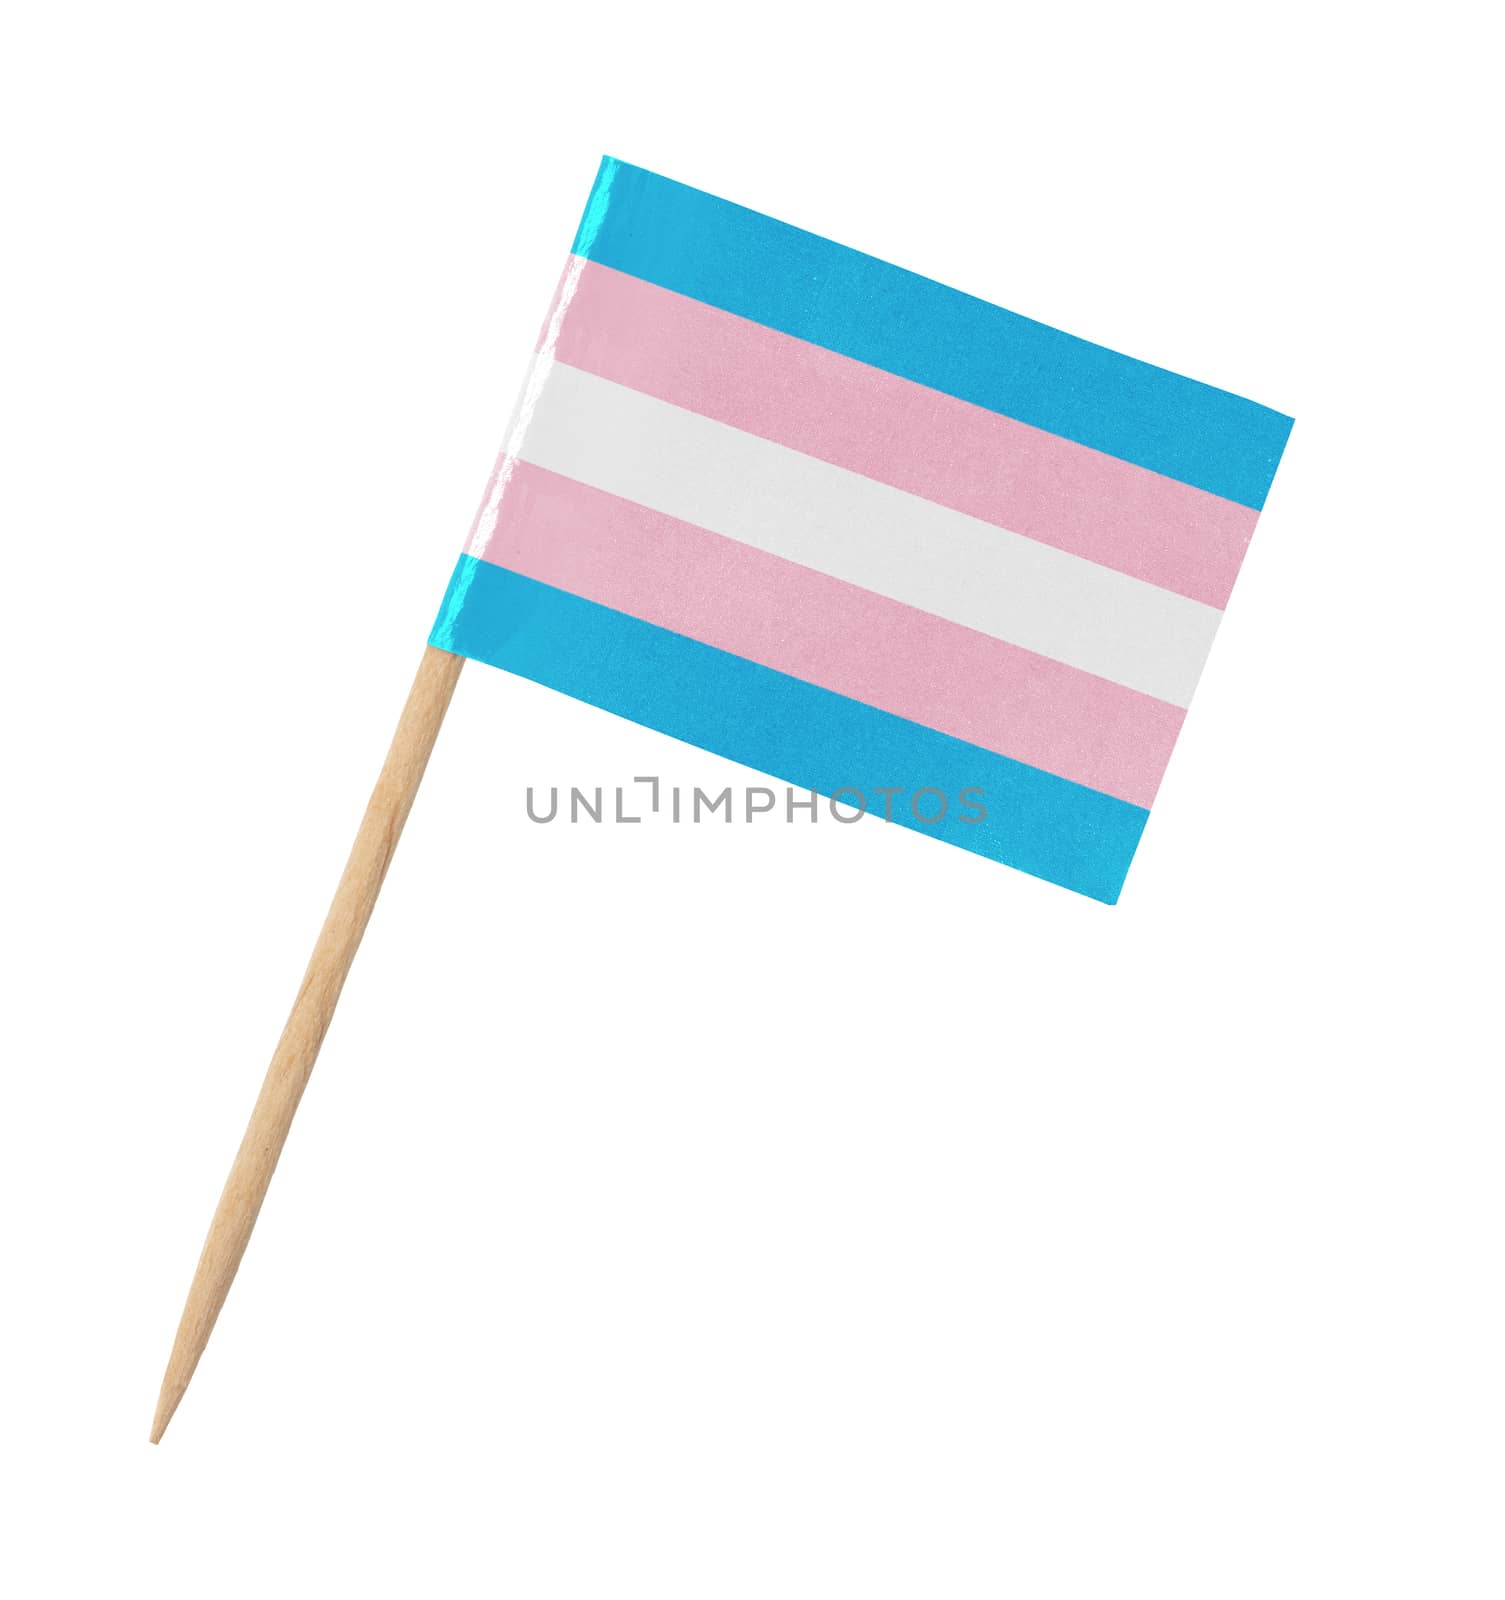 Small paper Transgender flag on wooden stick, isolated on white